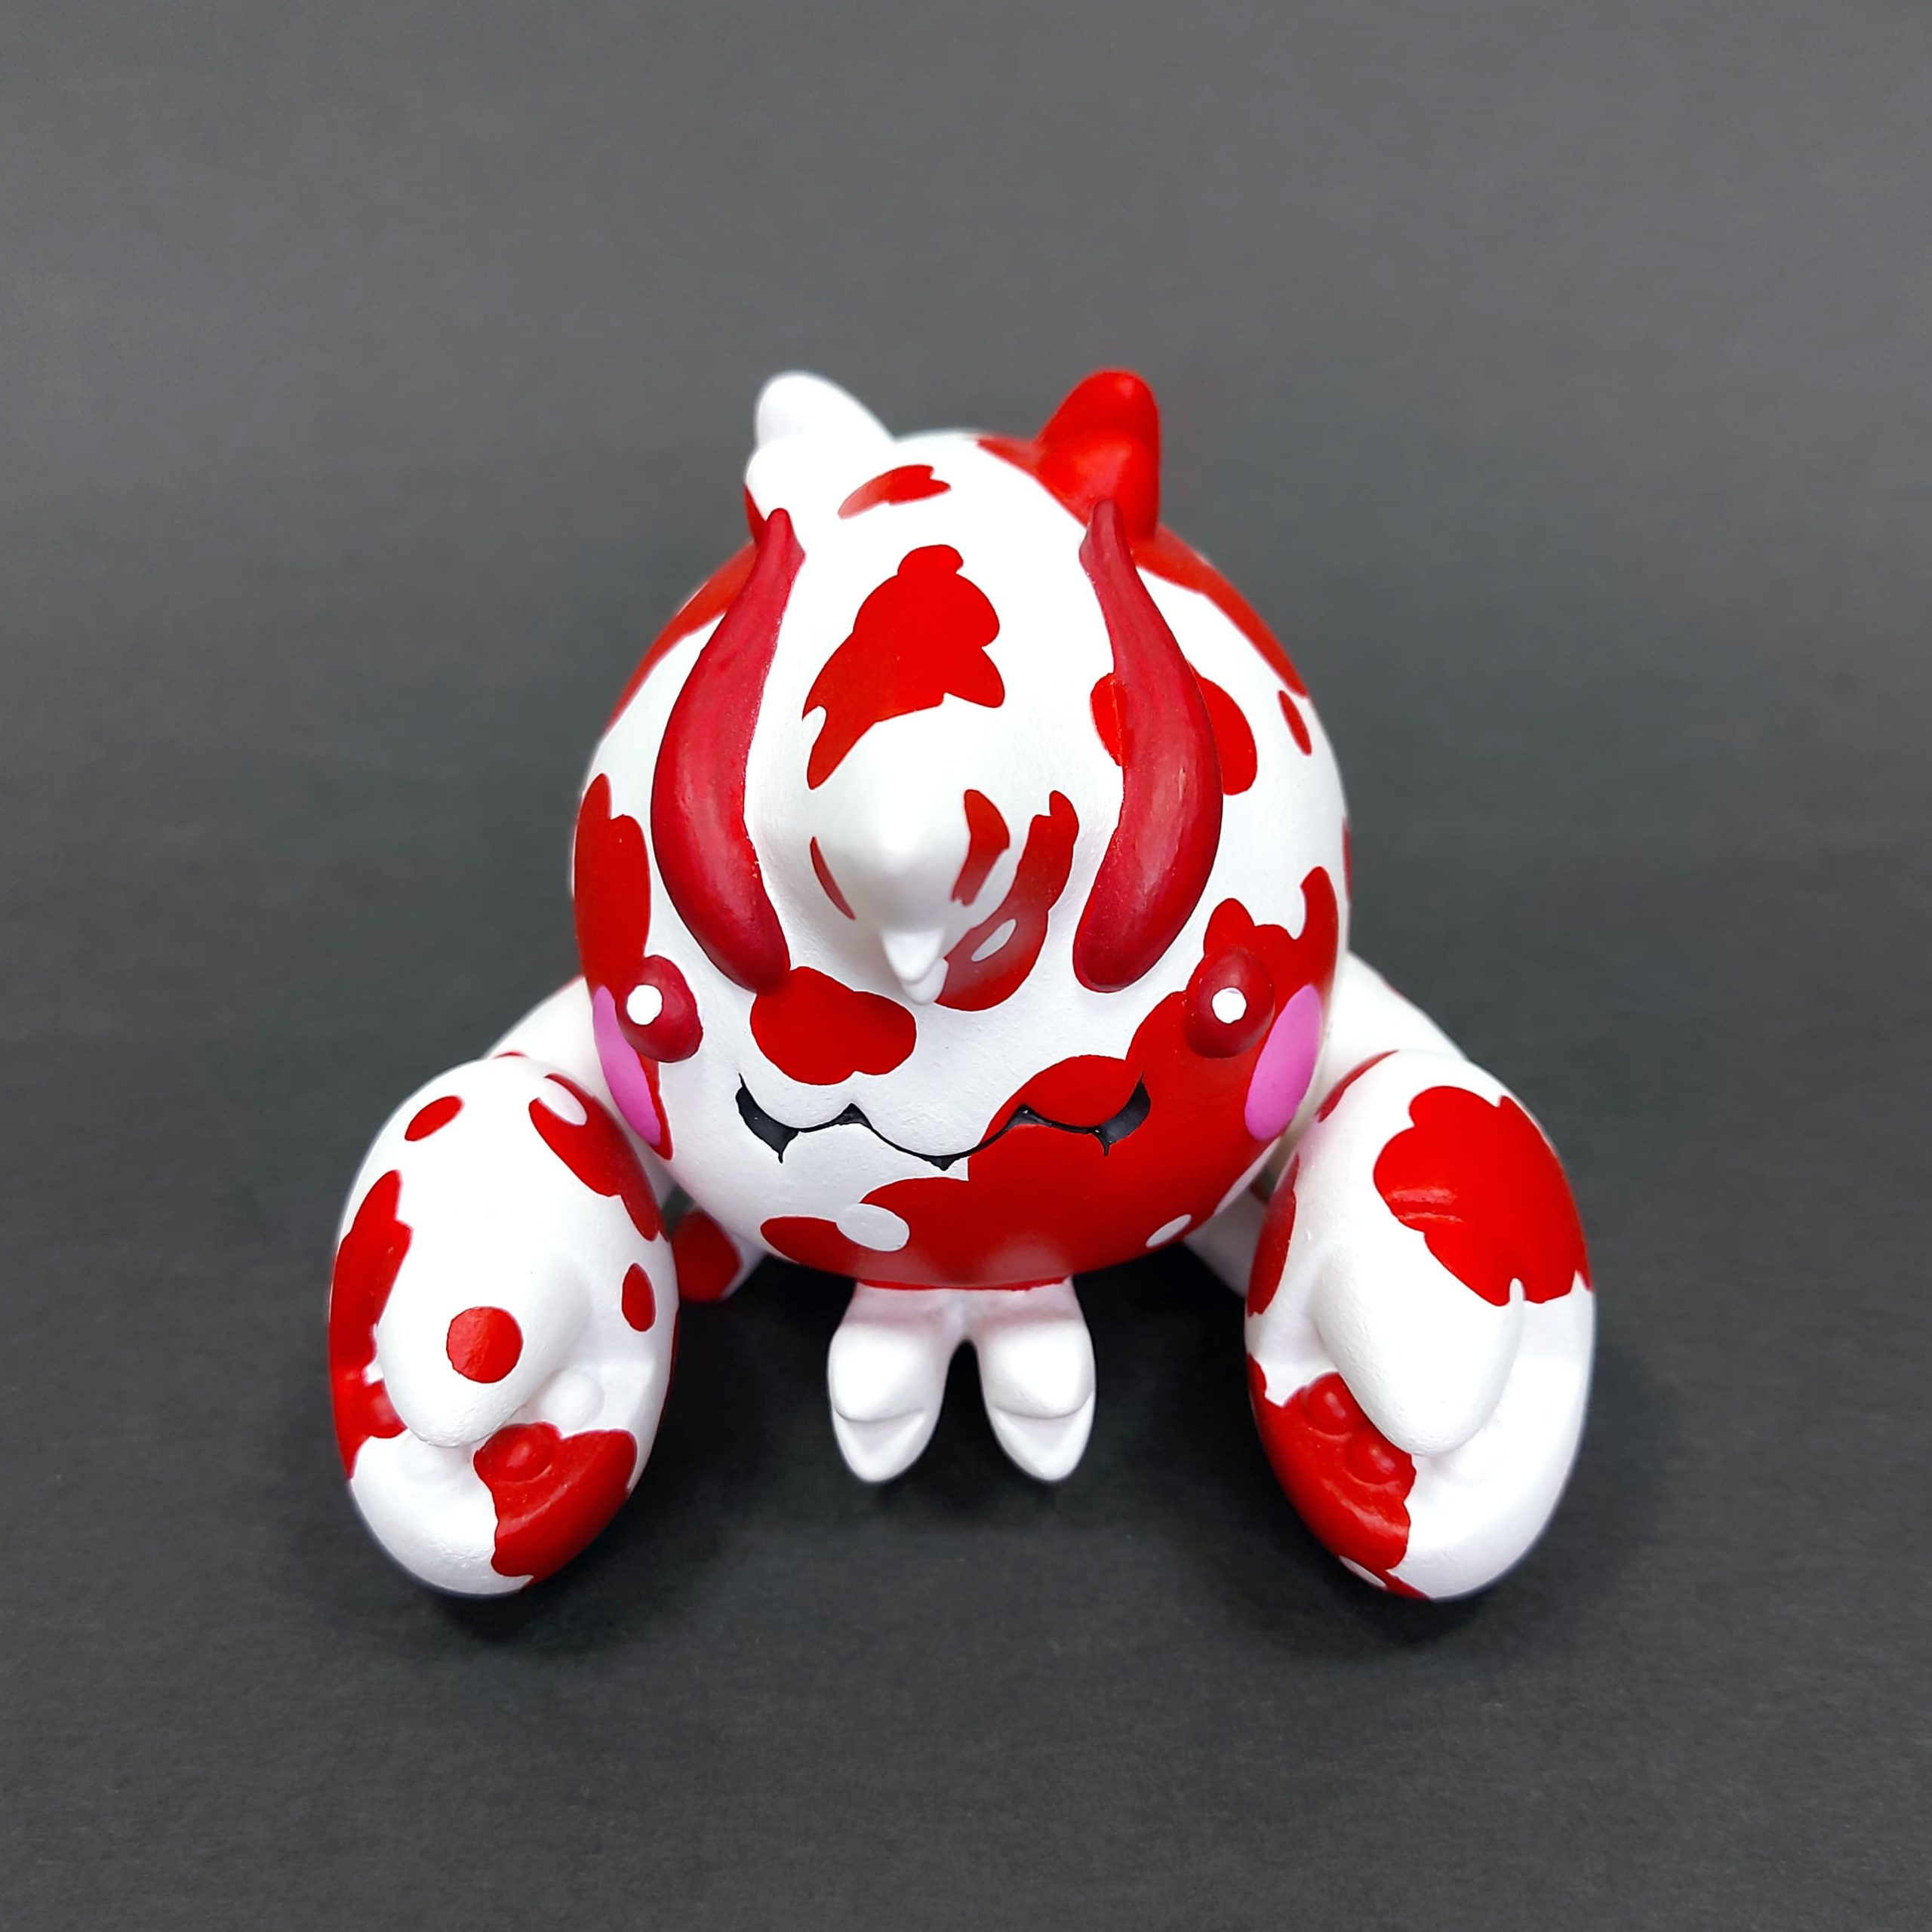 BBO Red Ball Hinomaru Edition by BigClawx x 78Jo - The Toy Chronicle